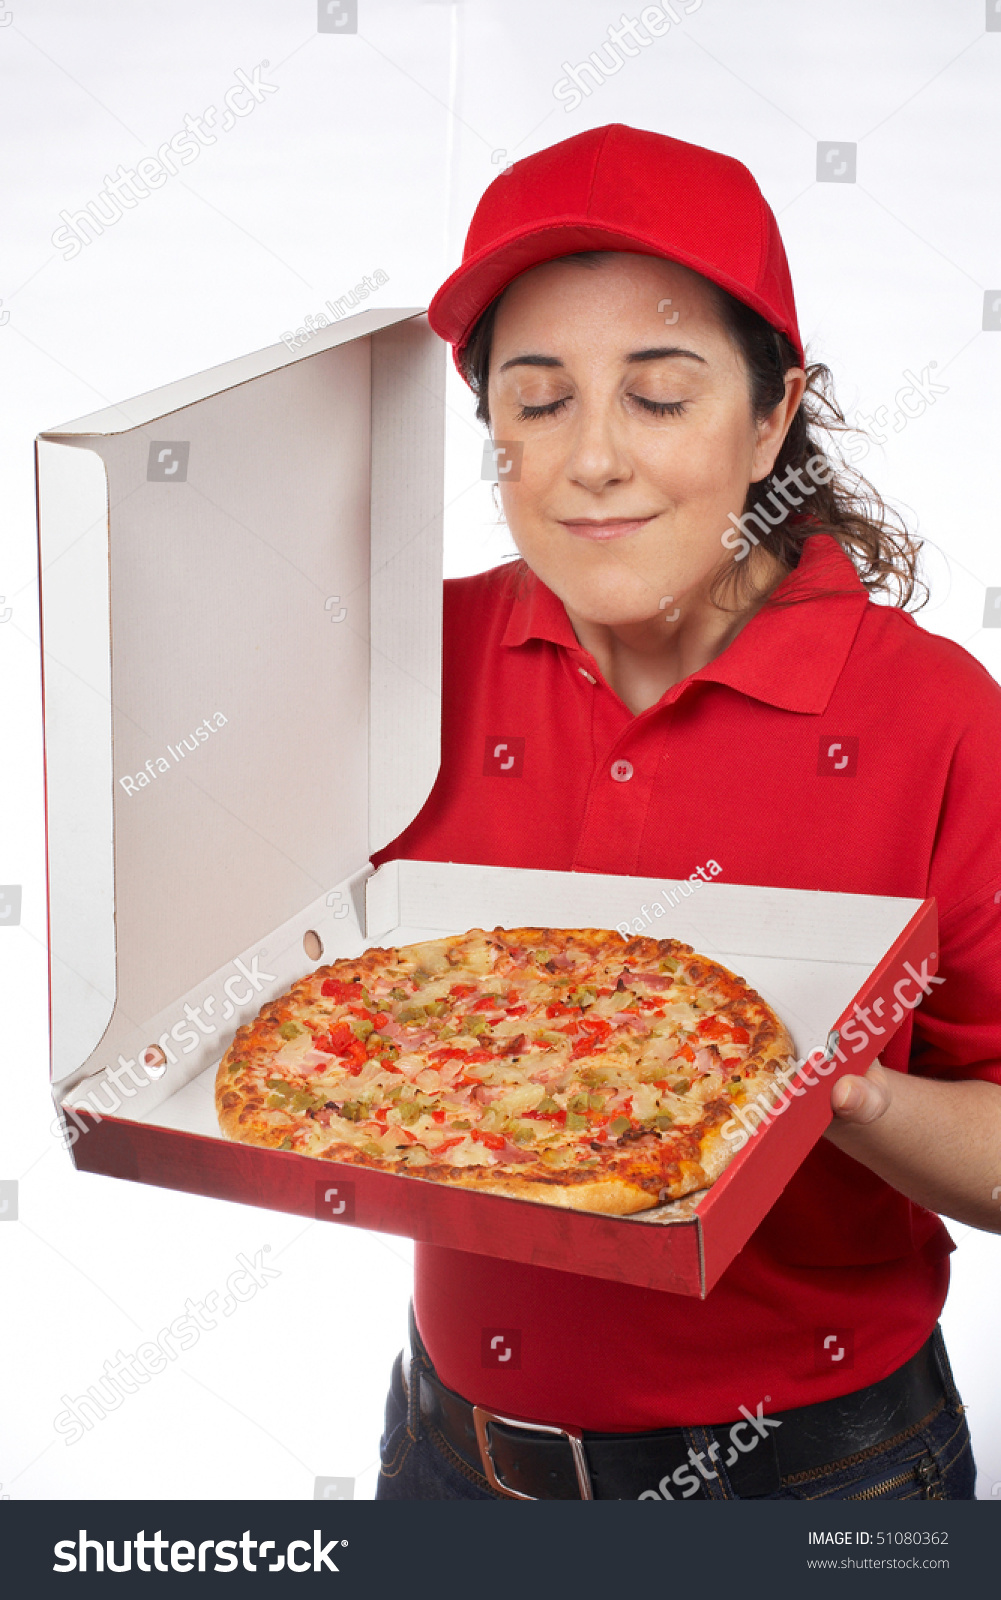 Pizza Delivery Woman Holding Hot Pizza pic